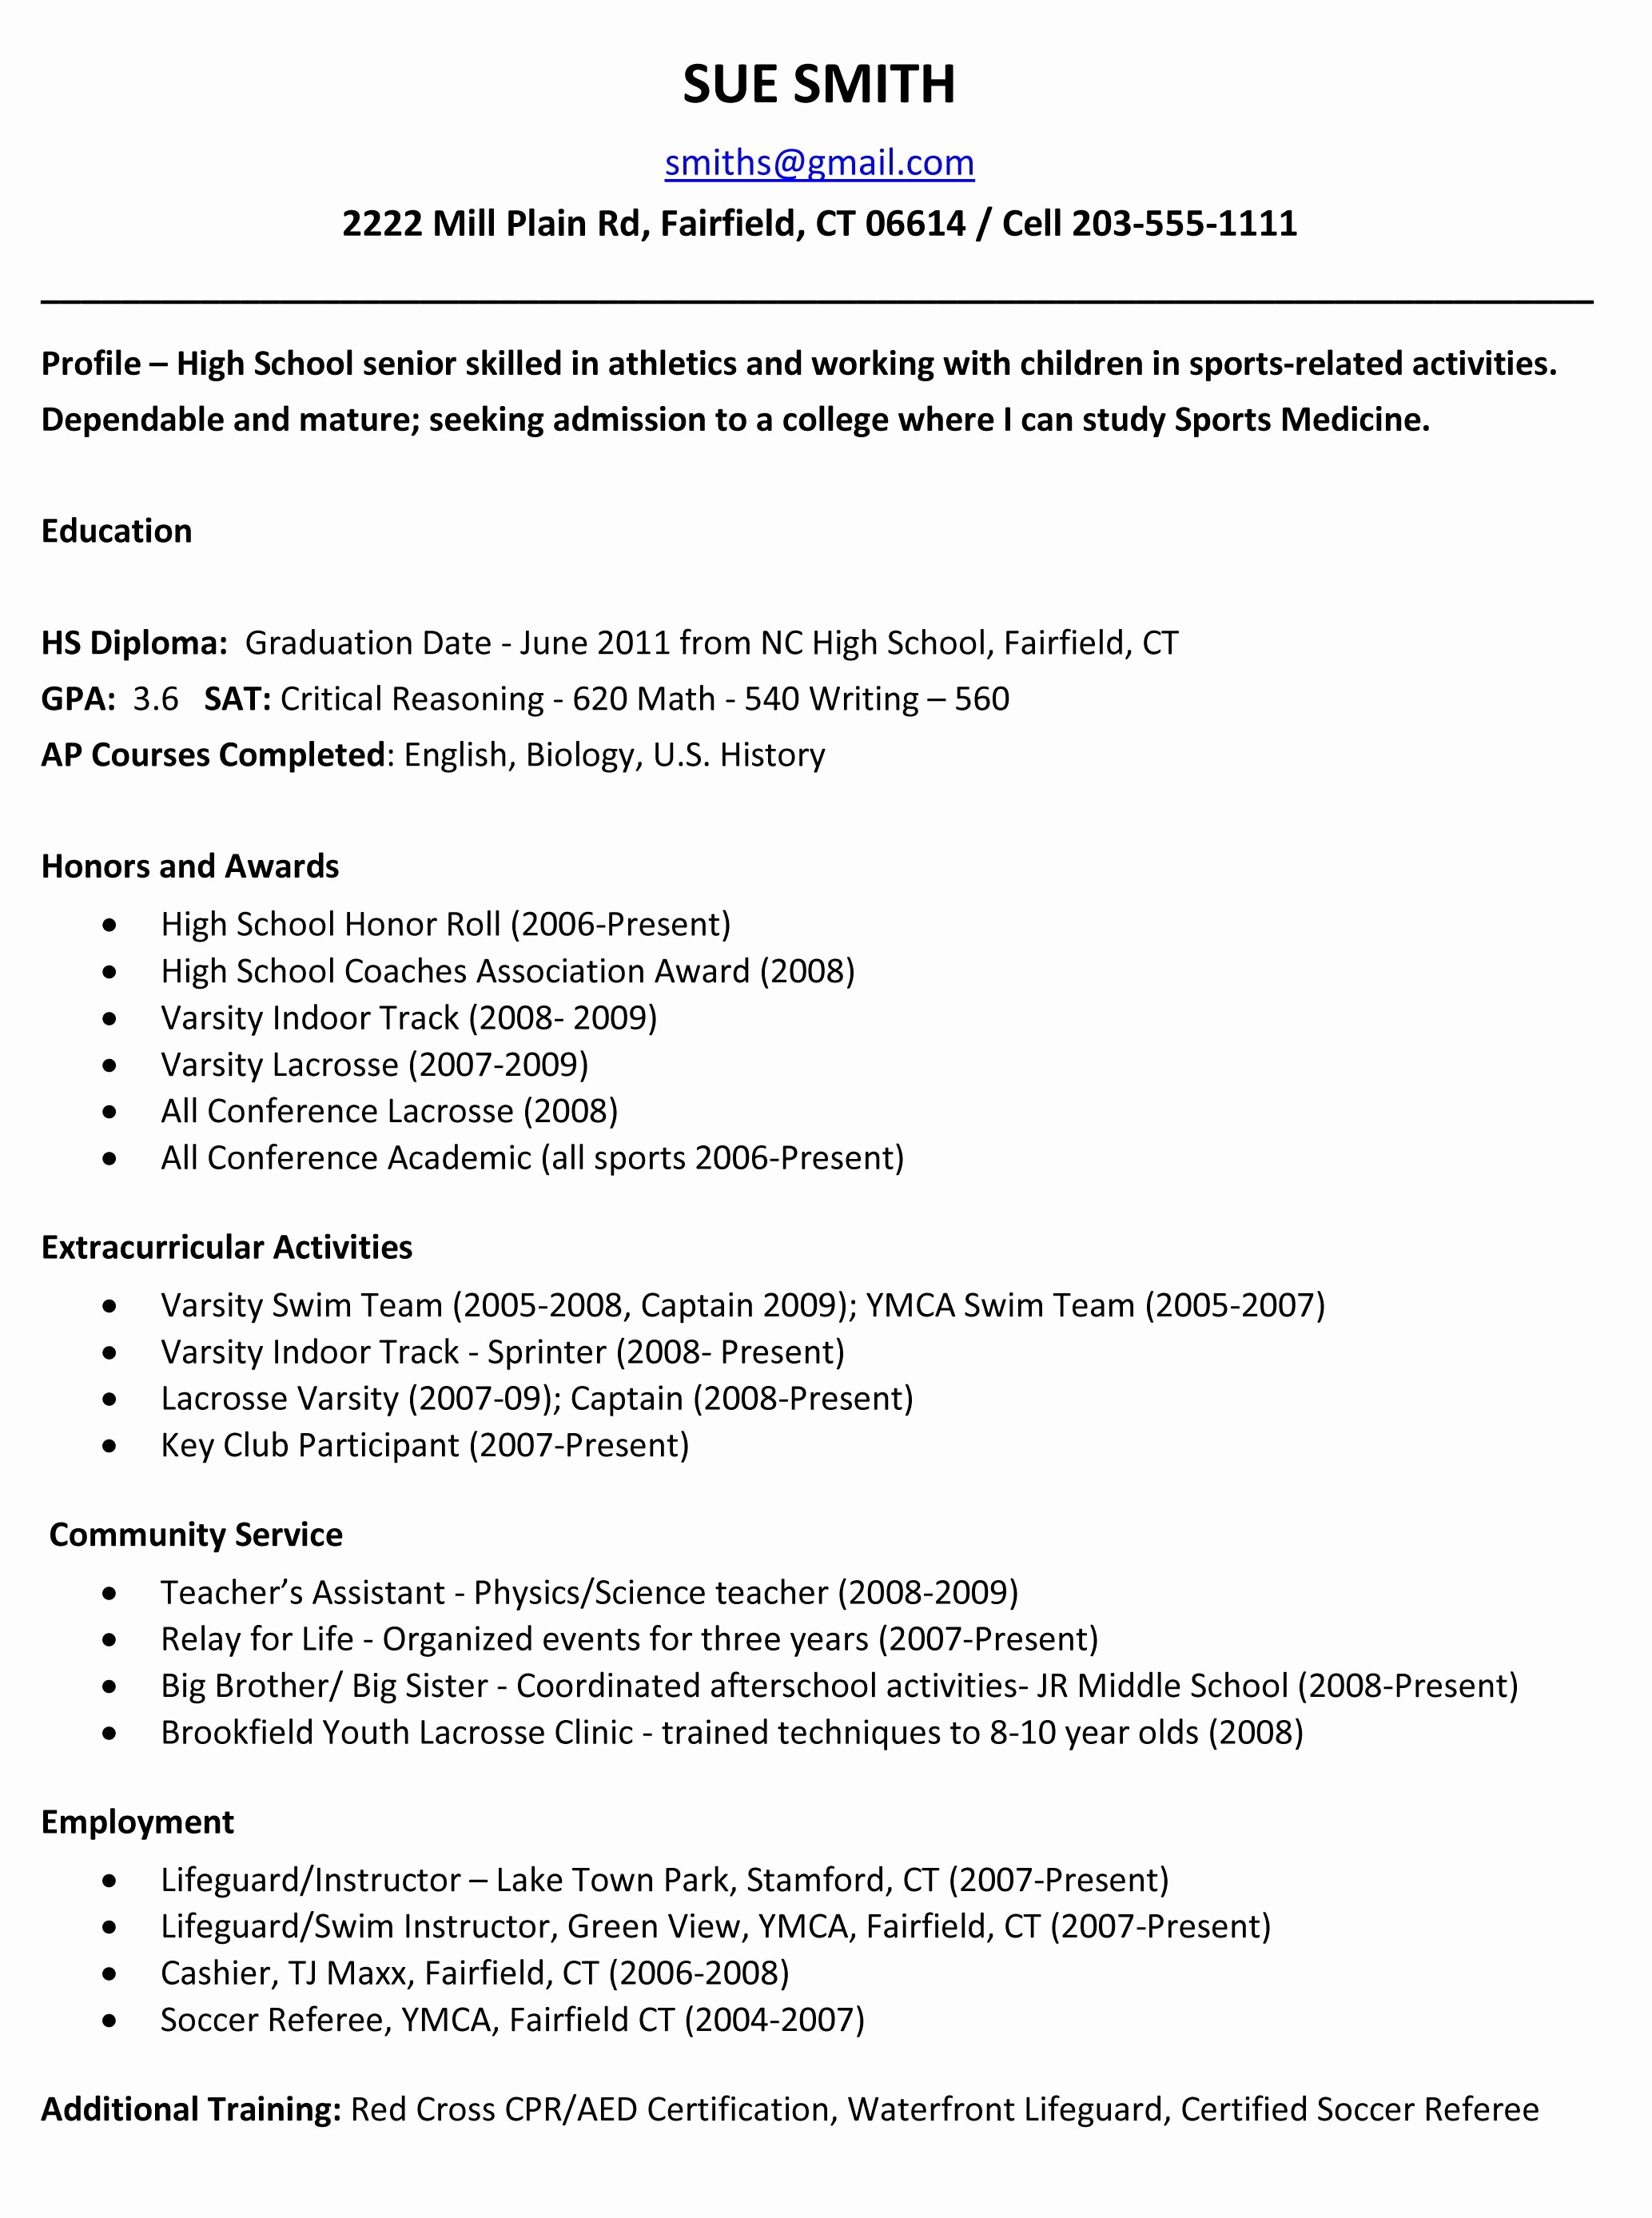 Resume High School Student Awesome Example Resume for High School Students for College